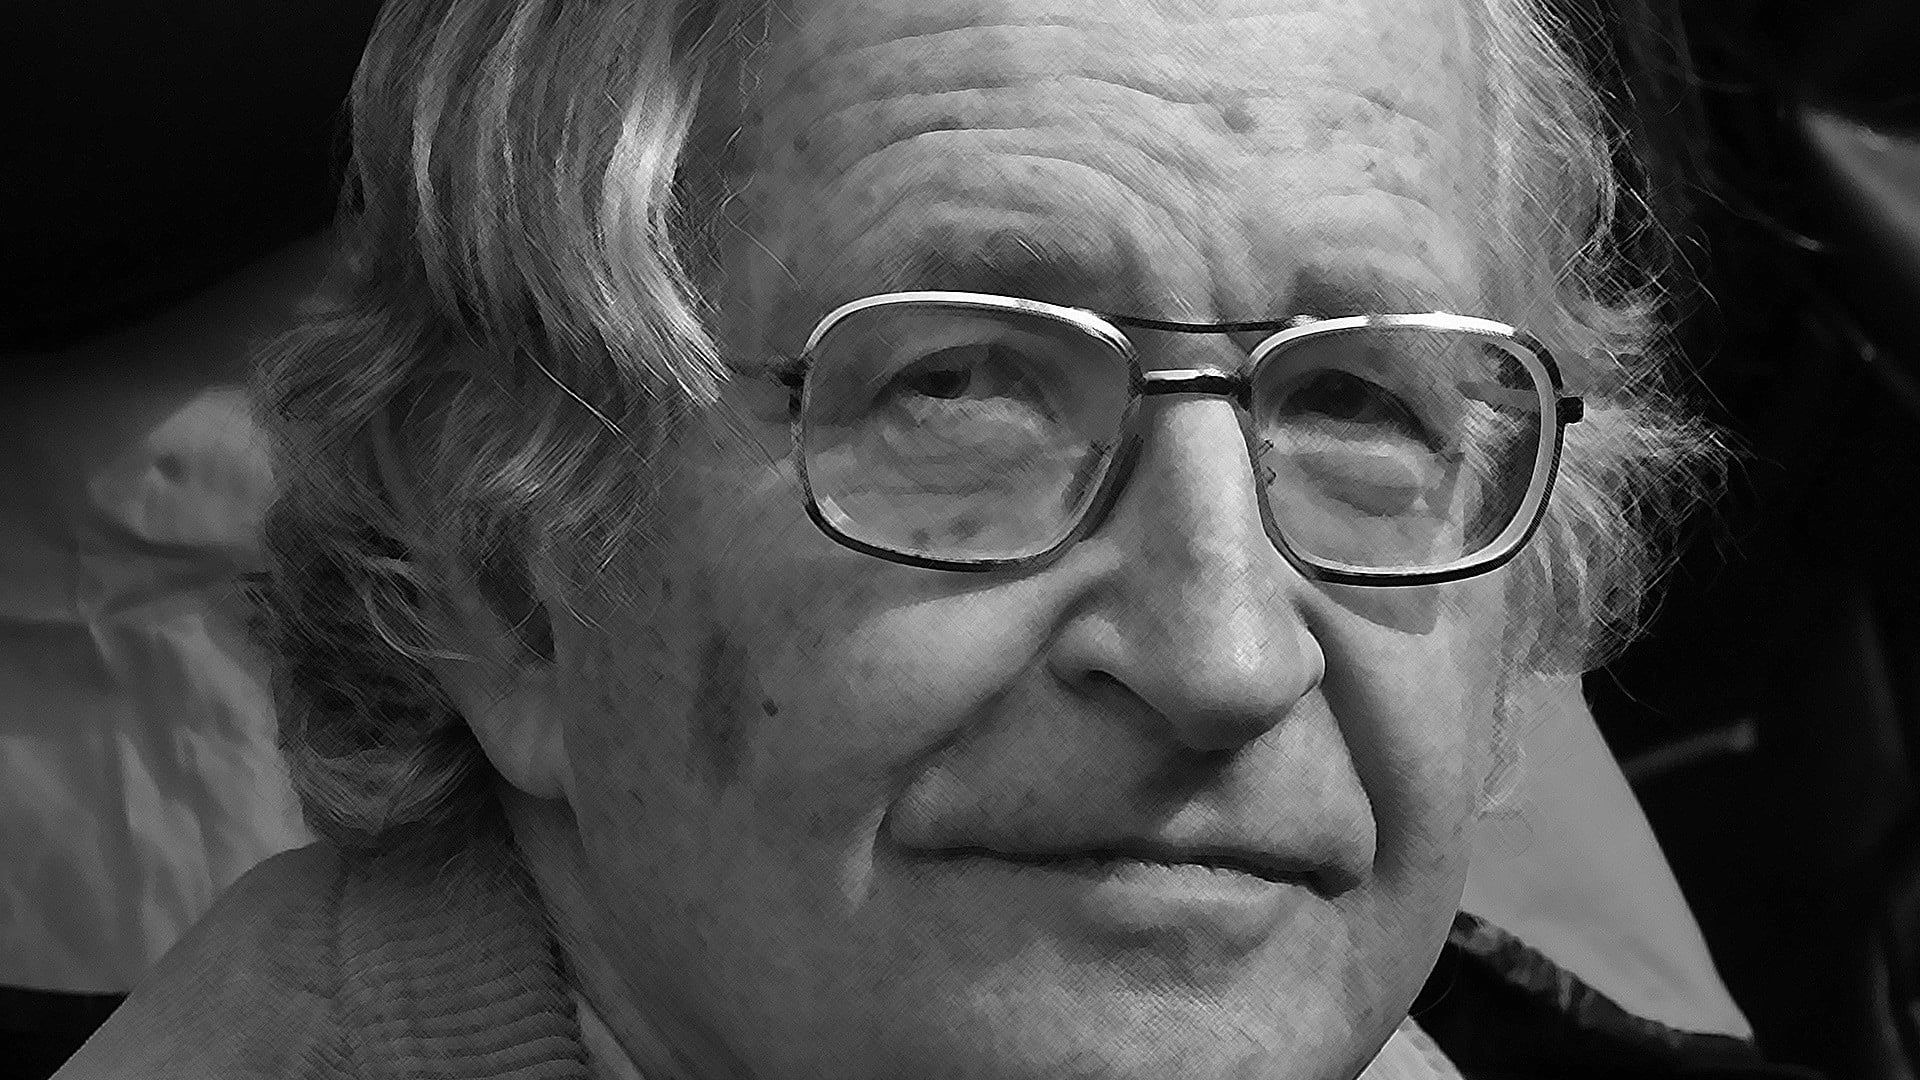 Manufacturing Consent: Noam Chomsky and the Media background